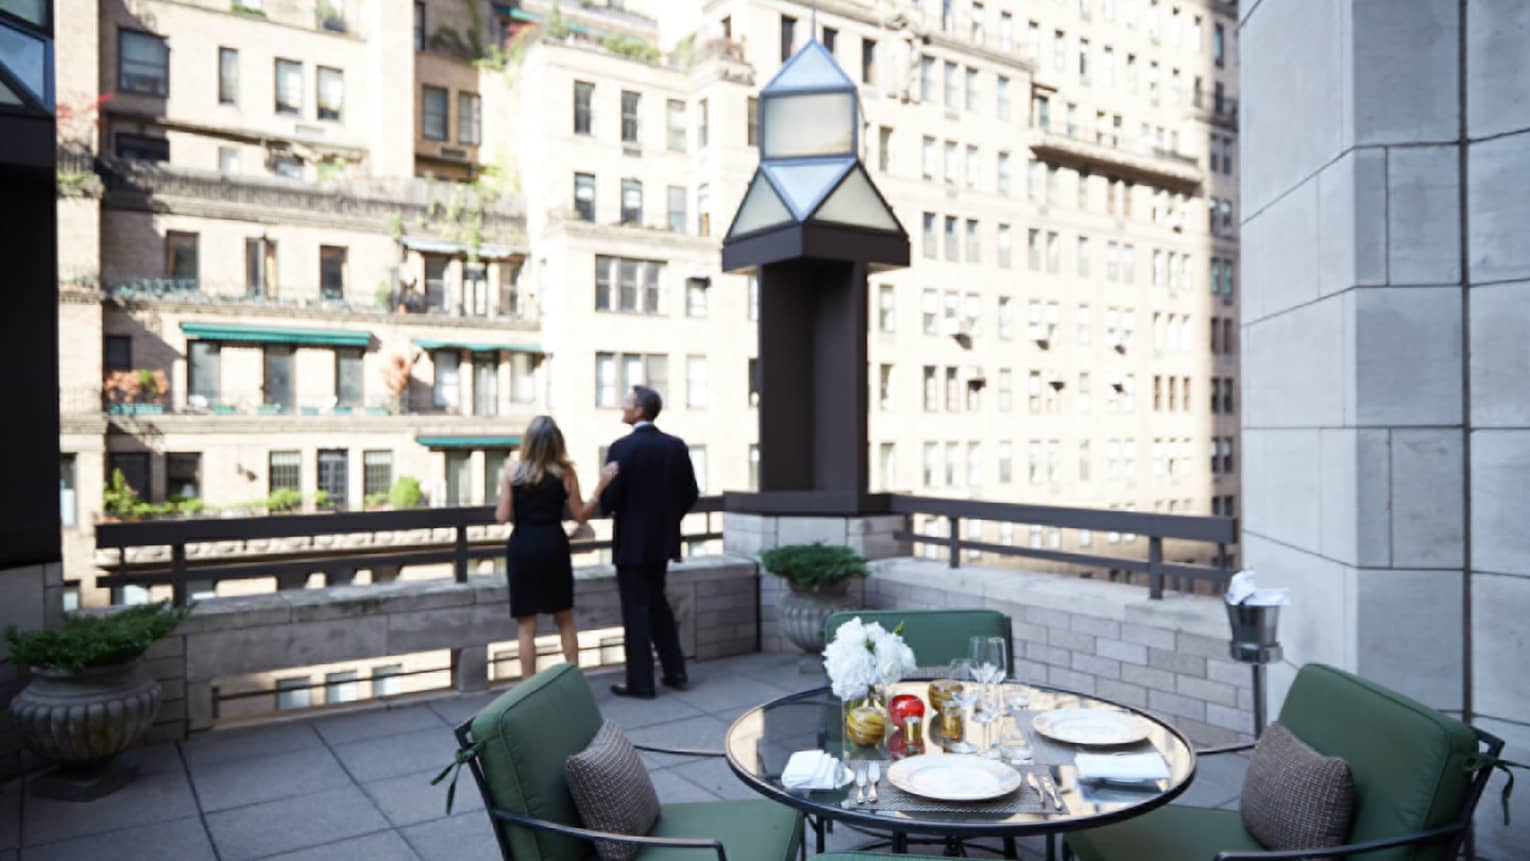 Man and woman in business suits look out from rooftop patio with table, plush chairs